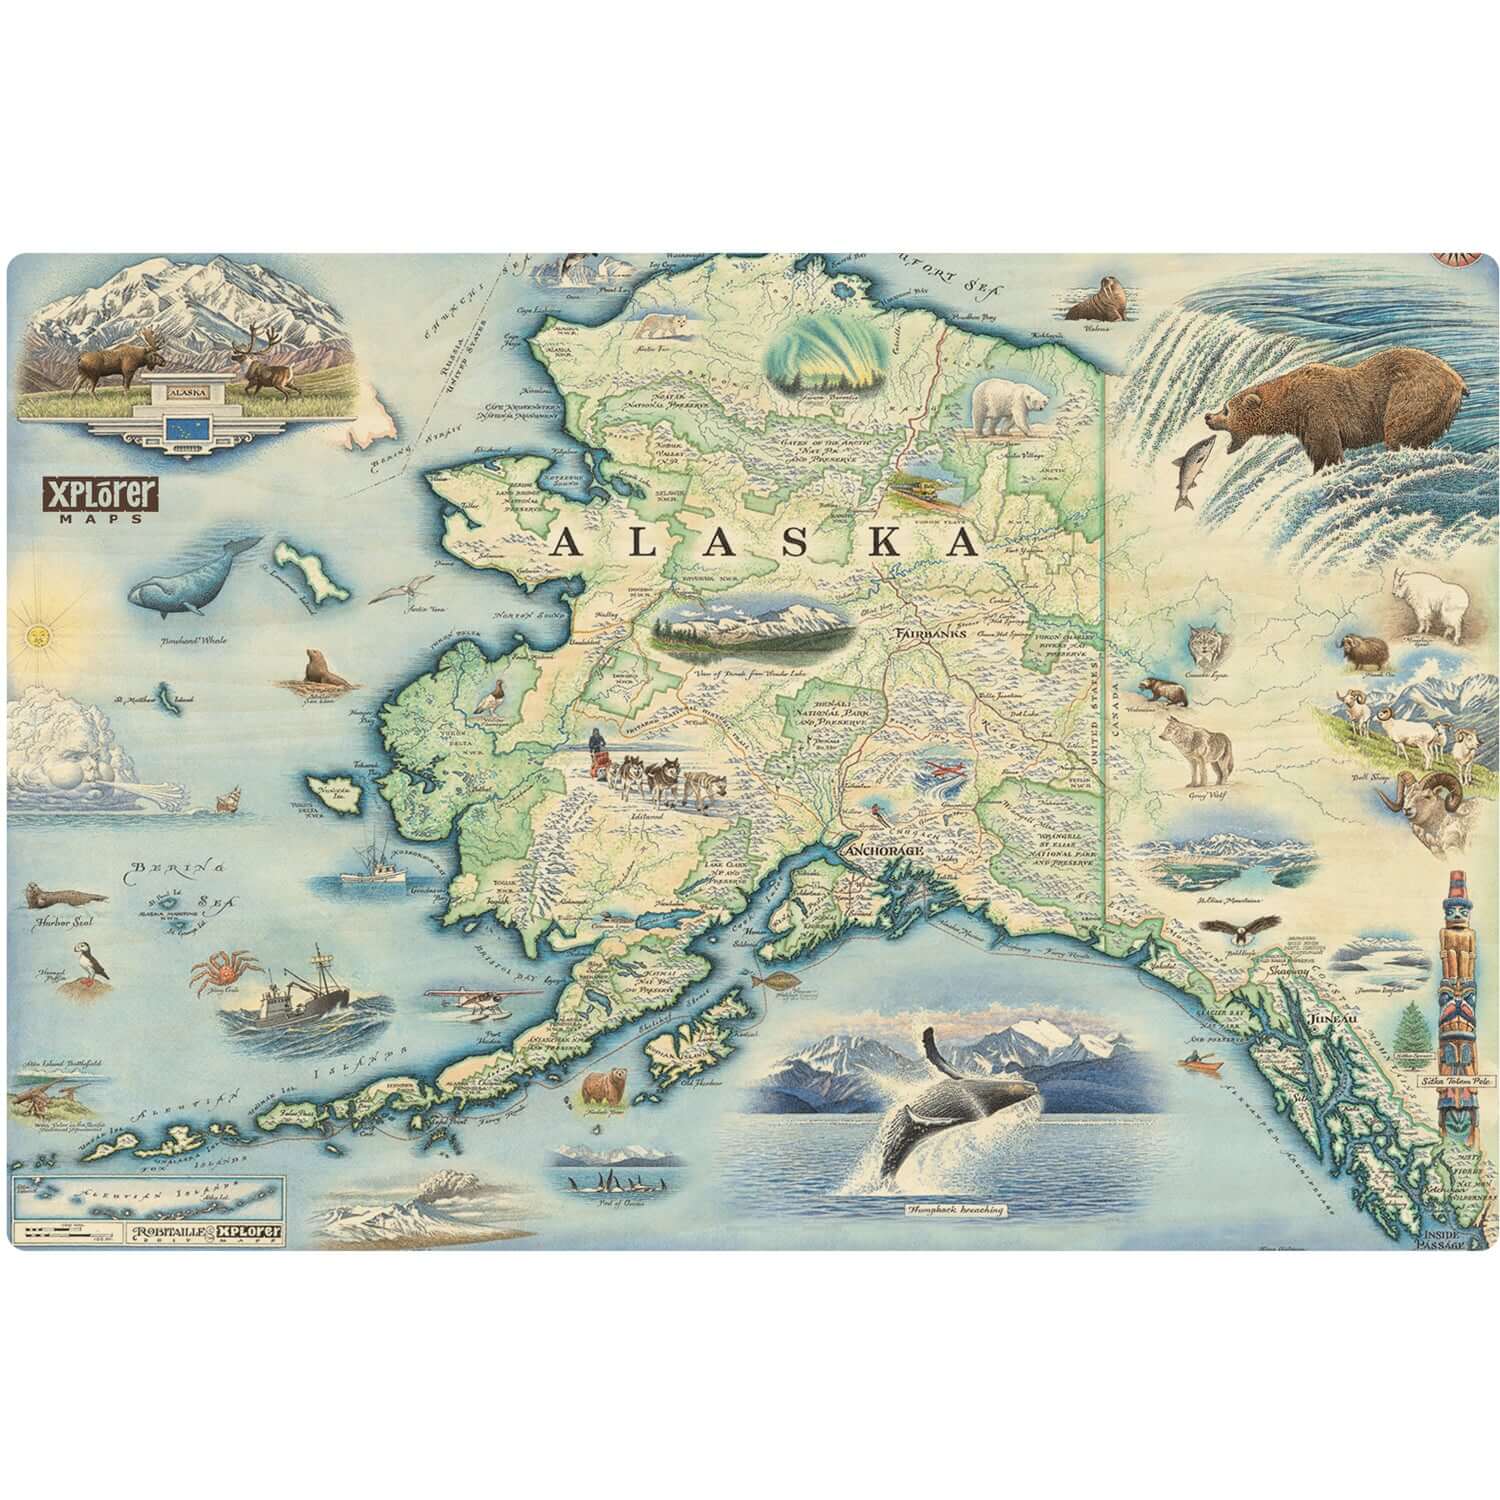 Alaska State map wood sign in earth tone colors - featuring Denali National Park, bears, whale, mountain goat & sheep. 